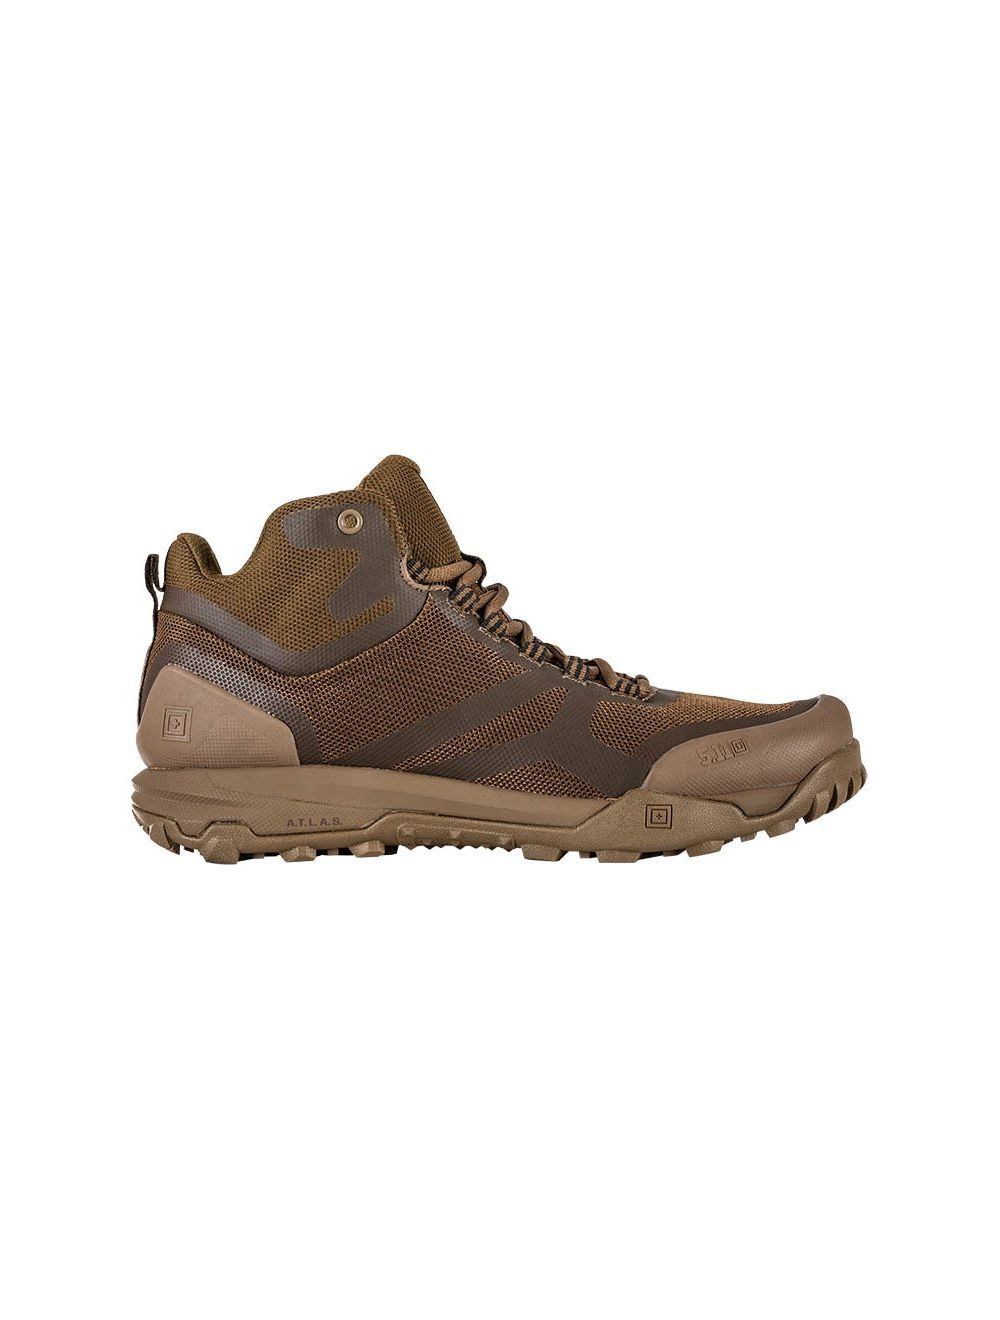 5.11 A.T.L.A.S. Mid By 5.11 Tactical 4-14 / Dark Coyote